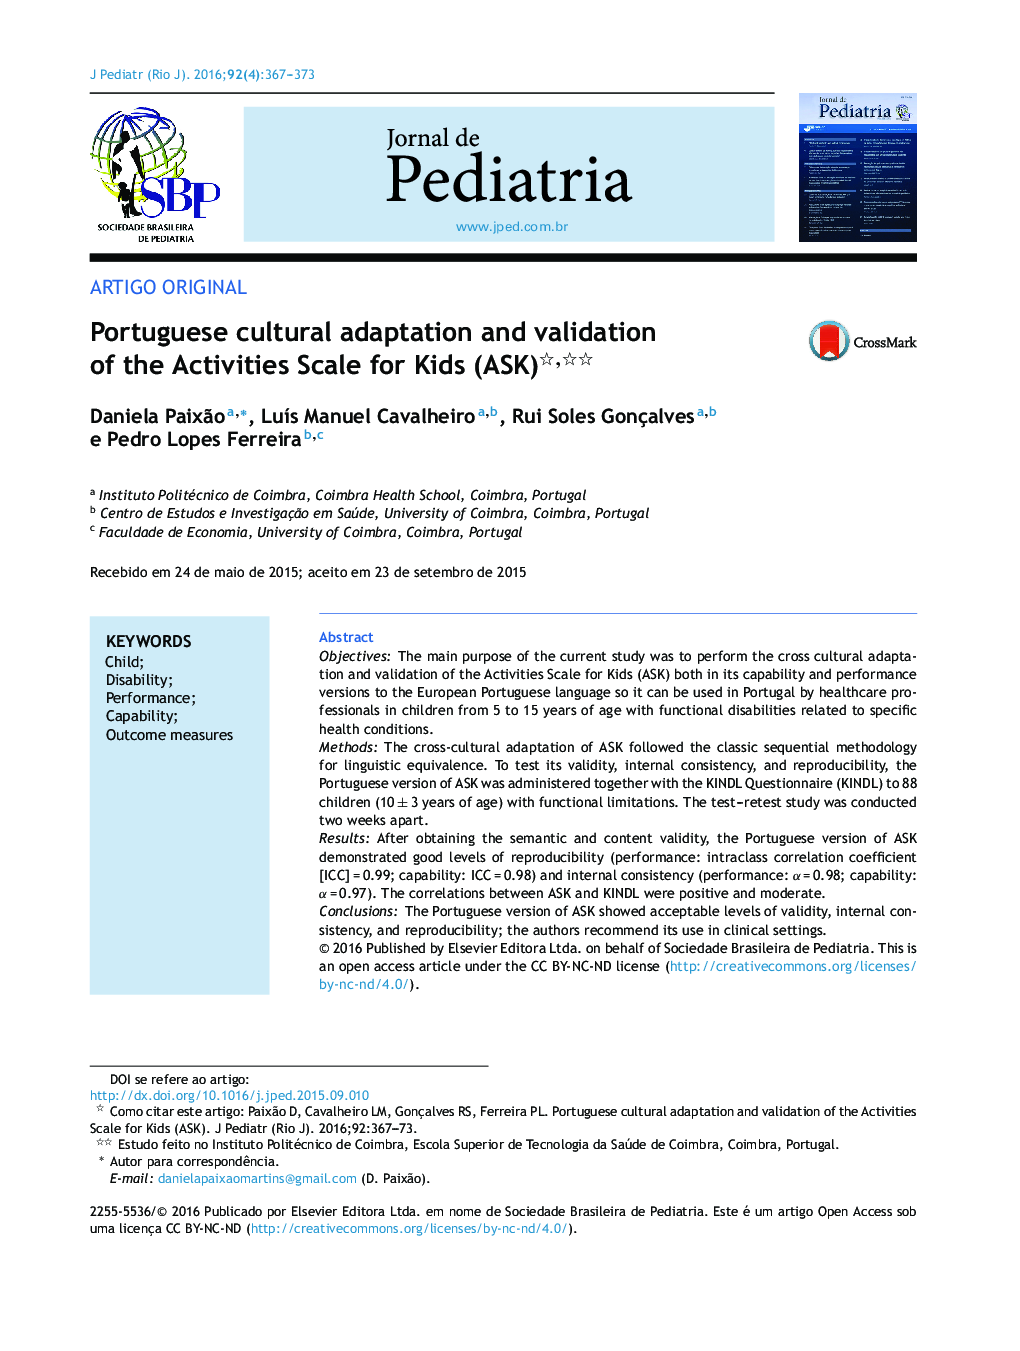 Portuguese cultural adaptation and validation of the Activities Scale for Kids (ASK) 